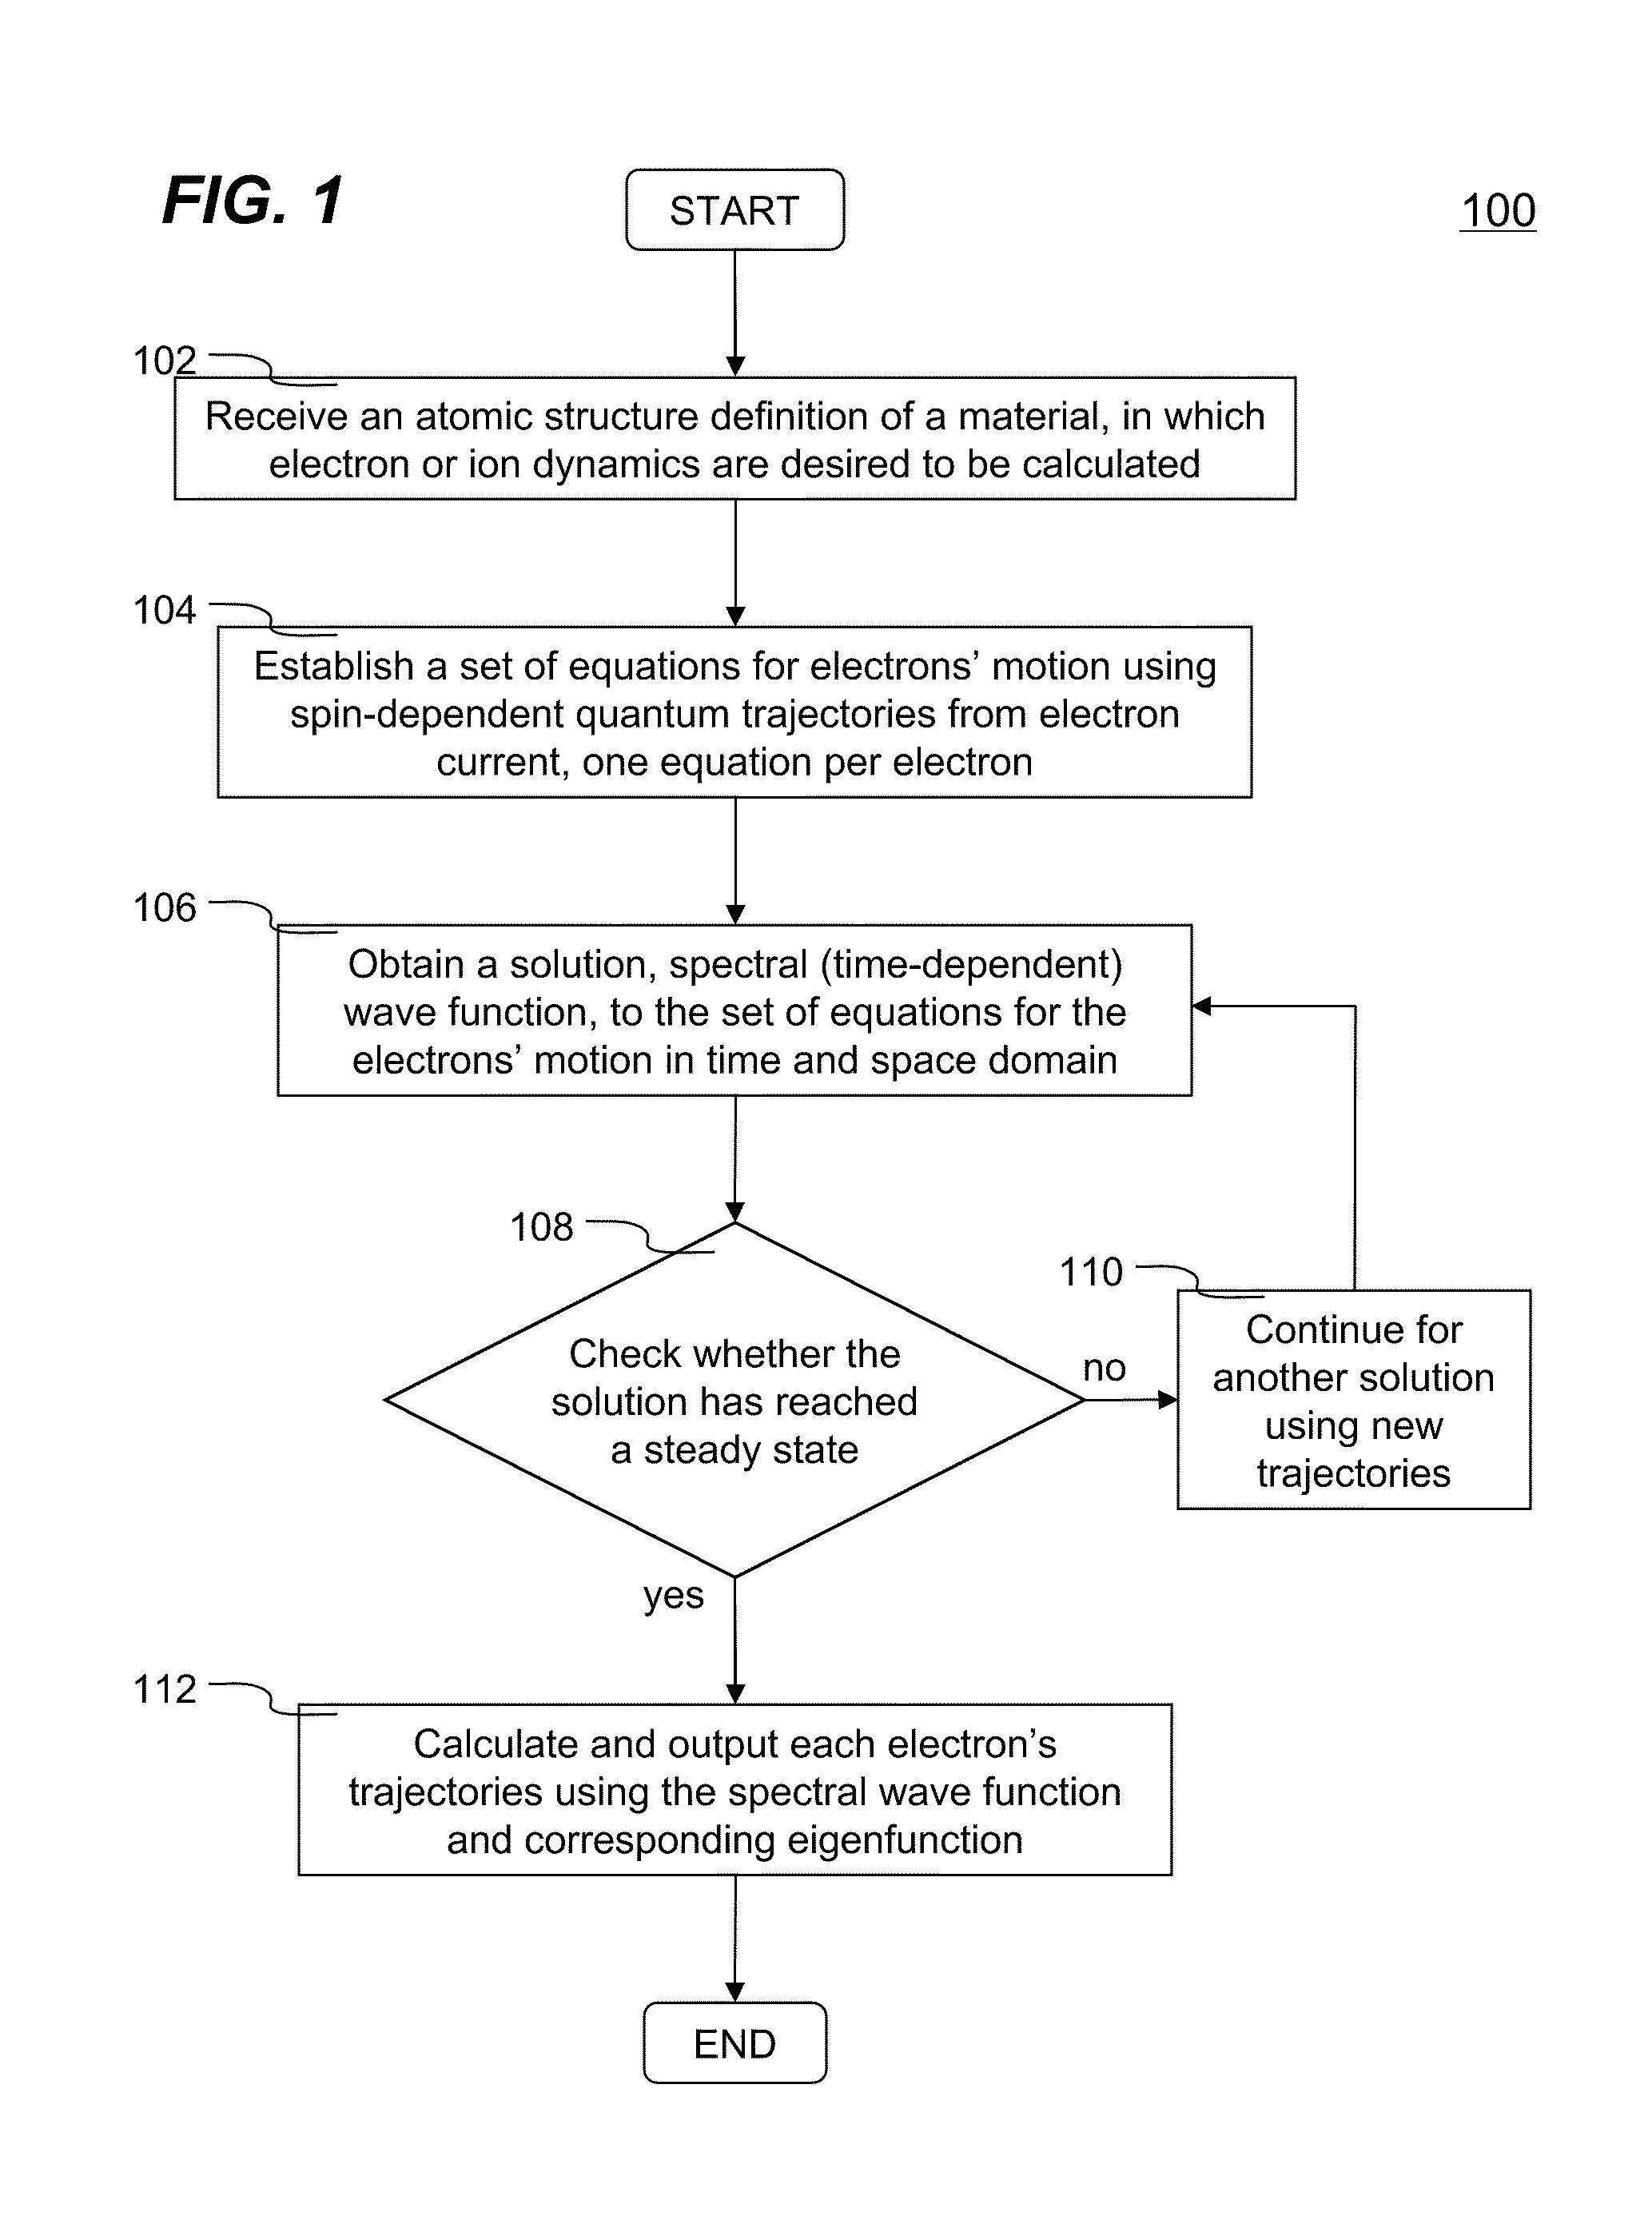 Systems and methods of calculating electron dynamics using spin-dependent quantum trajectories